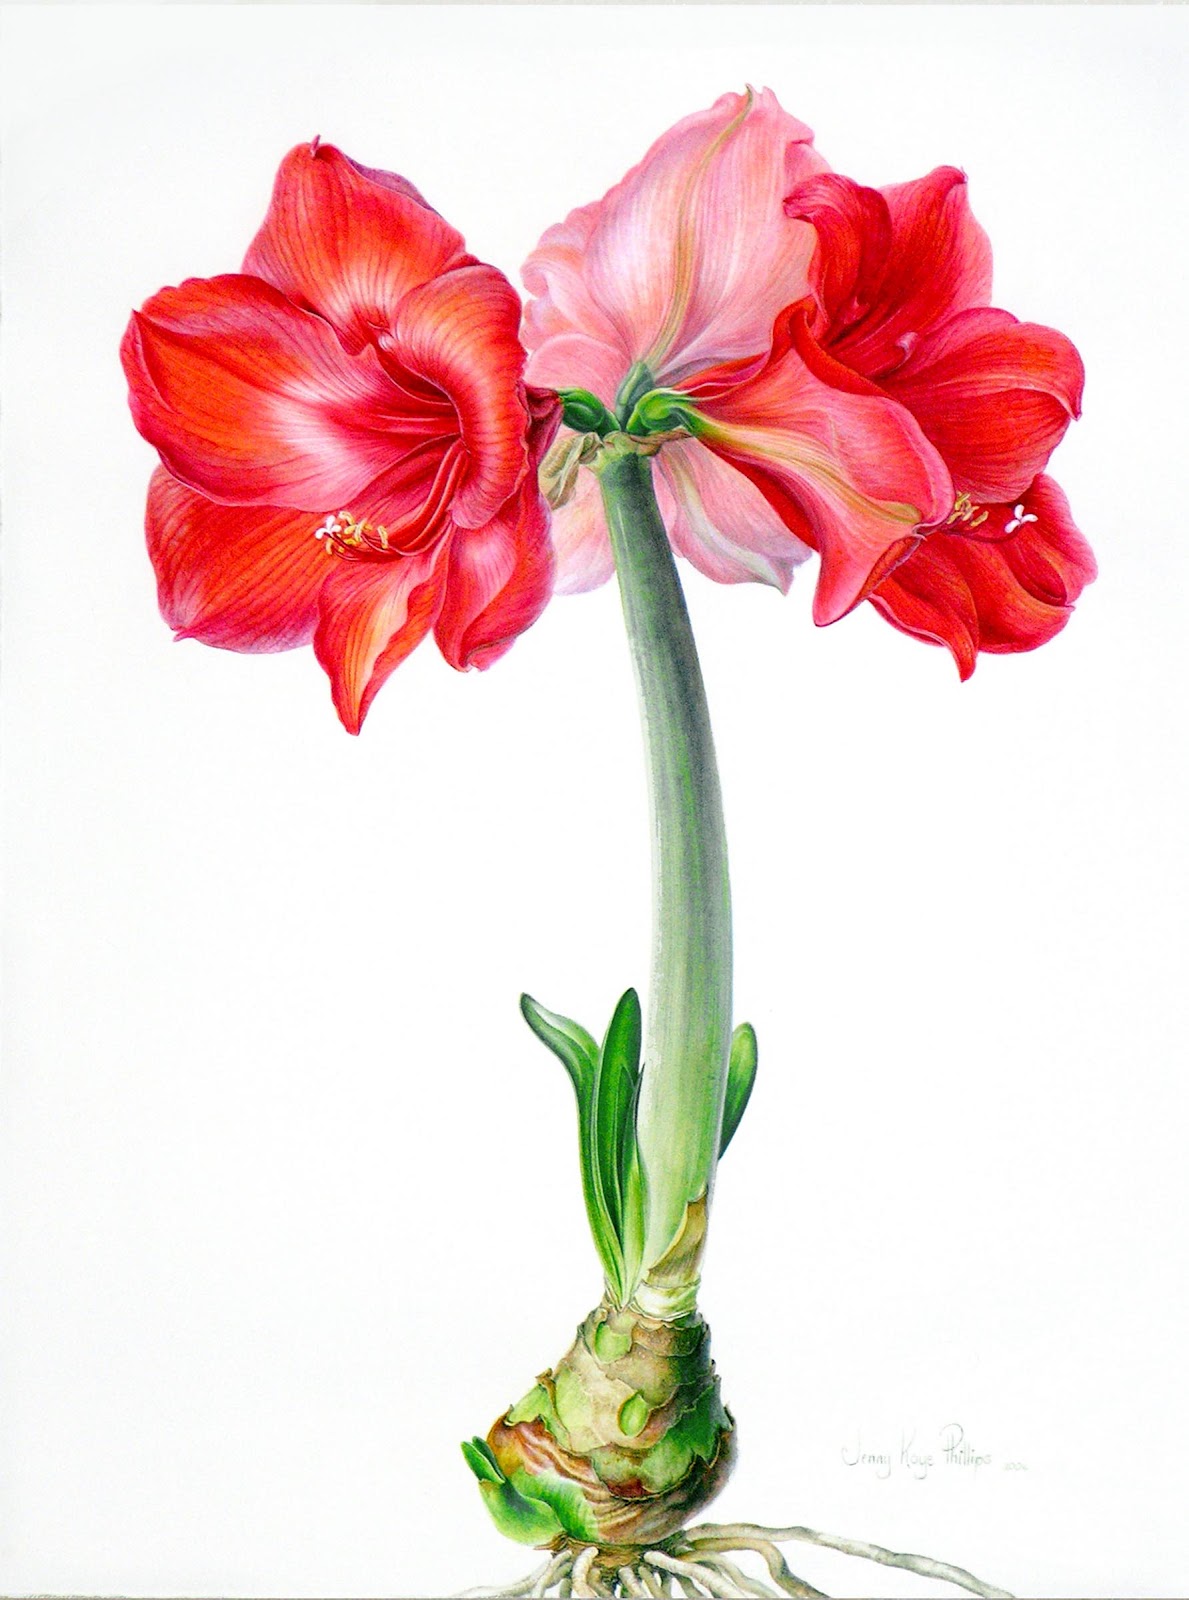 Graham Arader: An Amaryllis Watercolor by the Renown 